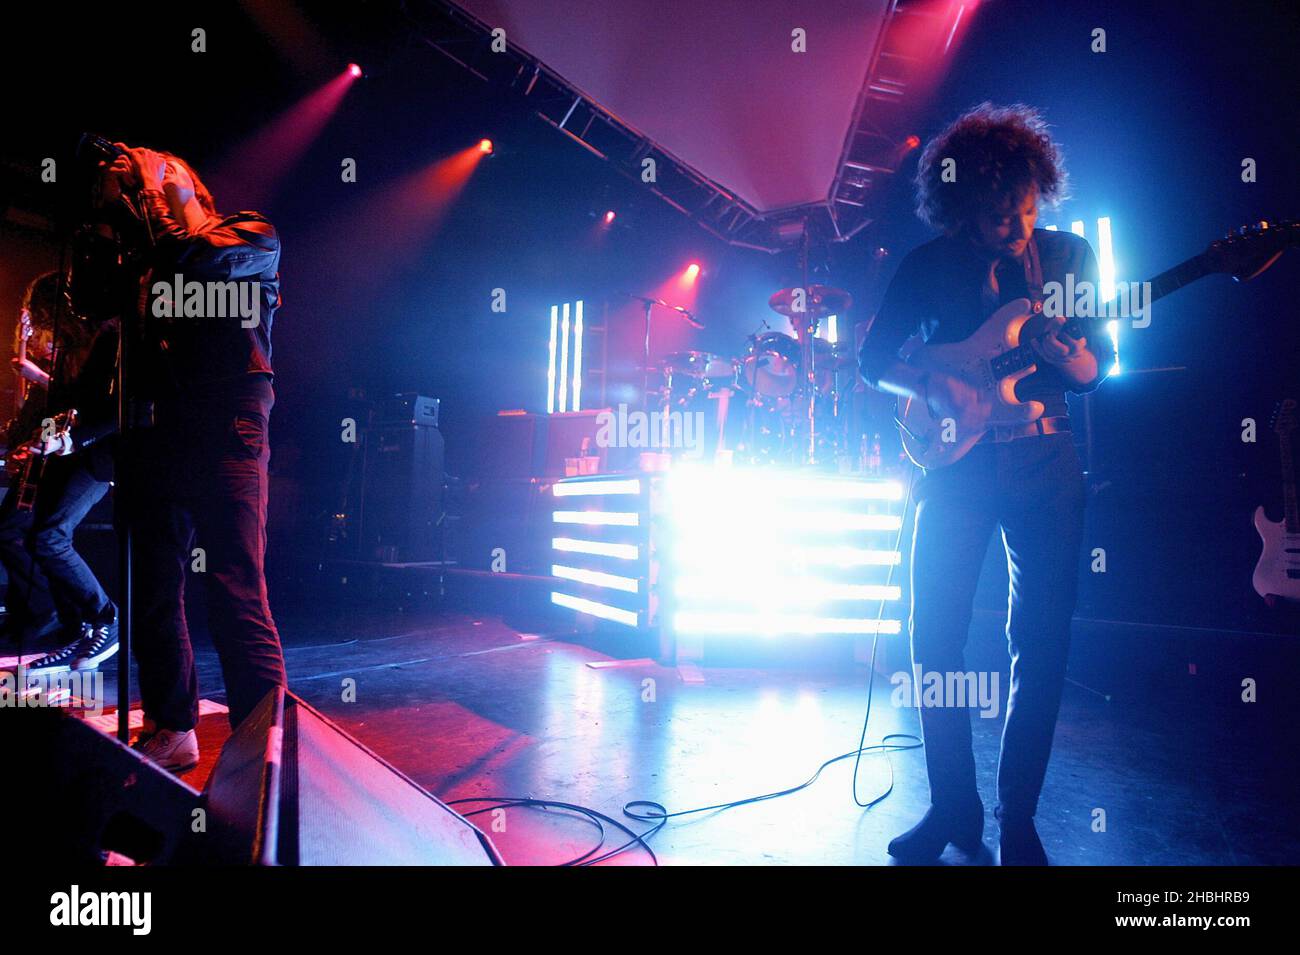 Julian Casablancas and Albert Hammond Junior of New York indie group The Strokes play their first London date of the UK tour promoting their third album 'First Impressions Of Earth', released January 9, at Shepherds Bush Empire in London. Stock Photo